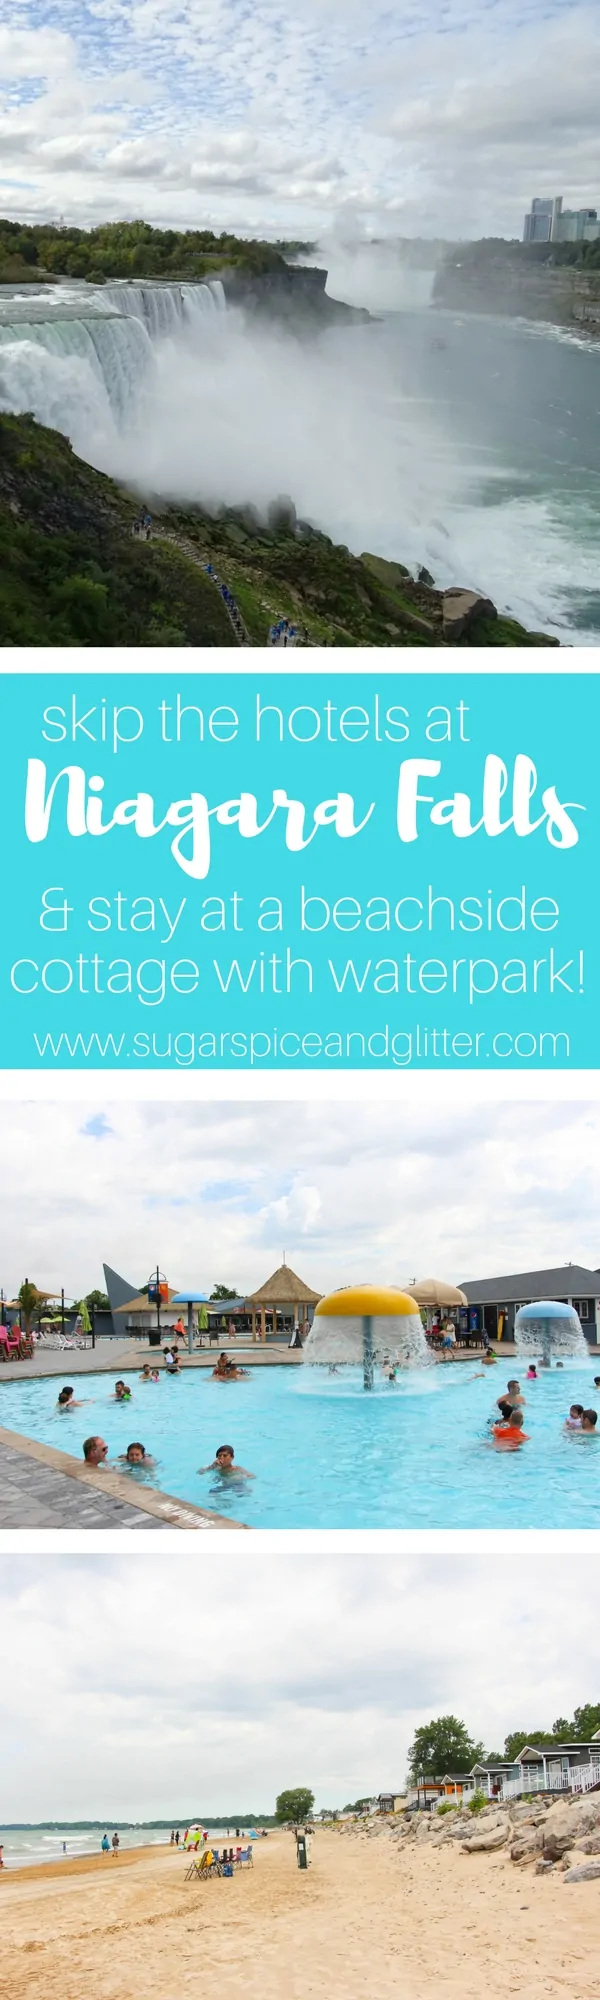 Skip the hotels and stay at this awesome beachside cottage resort for your Niagara Falls Family Vacation - on a budget!